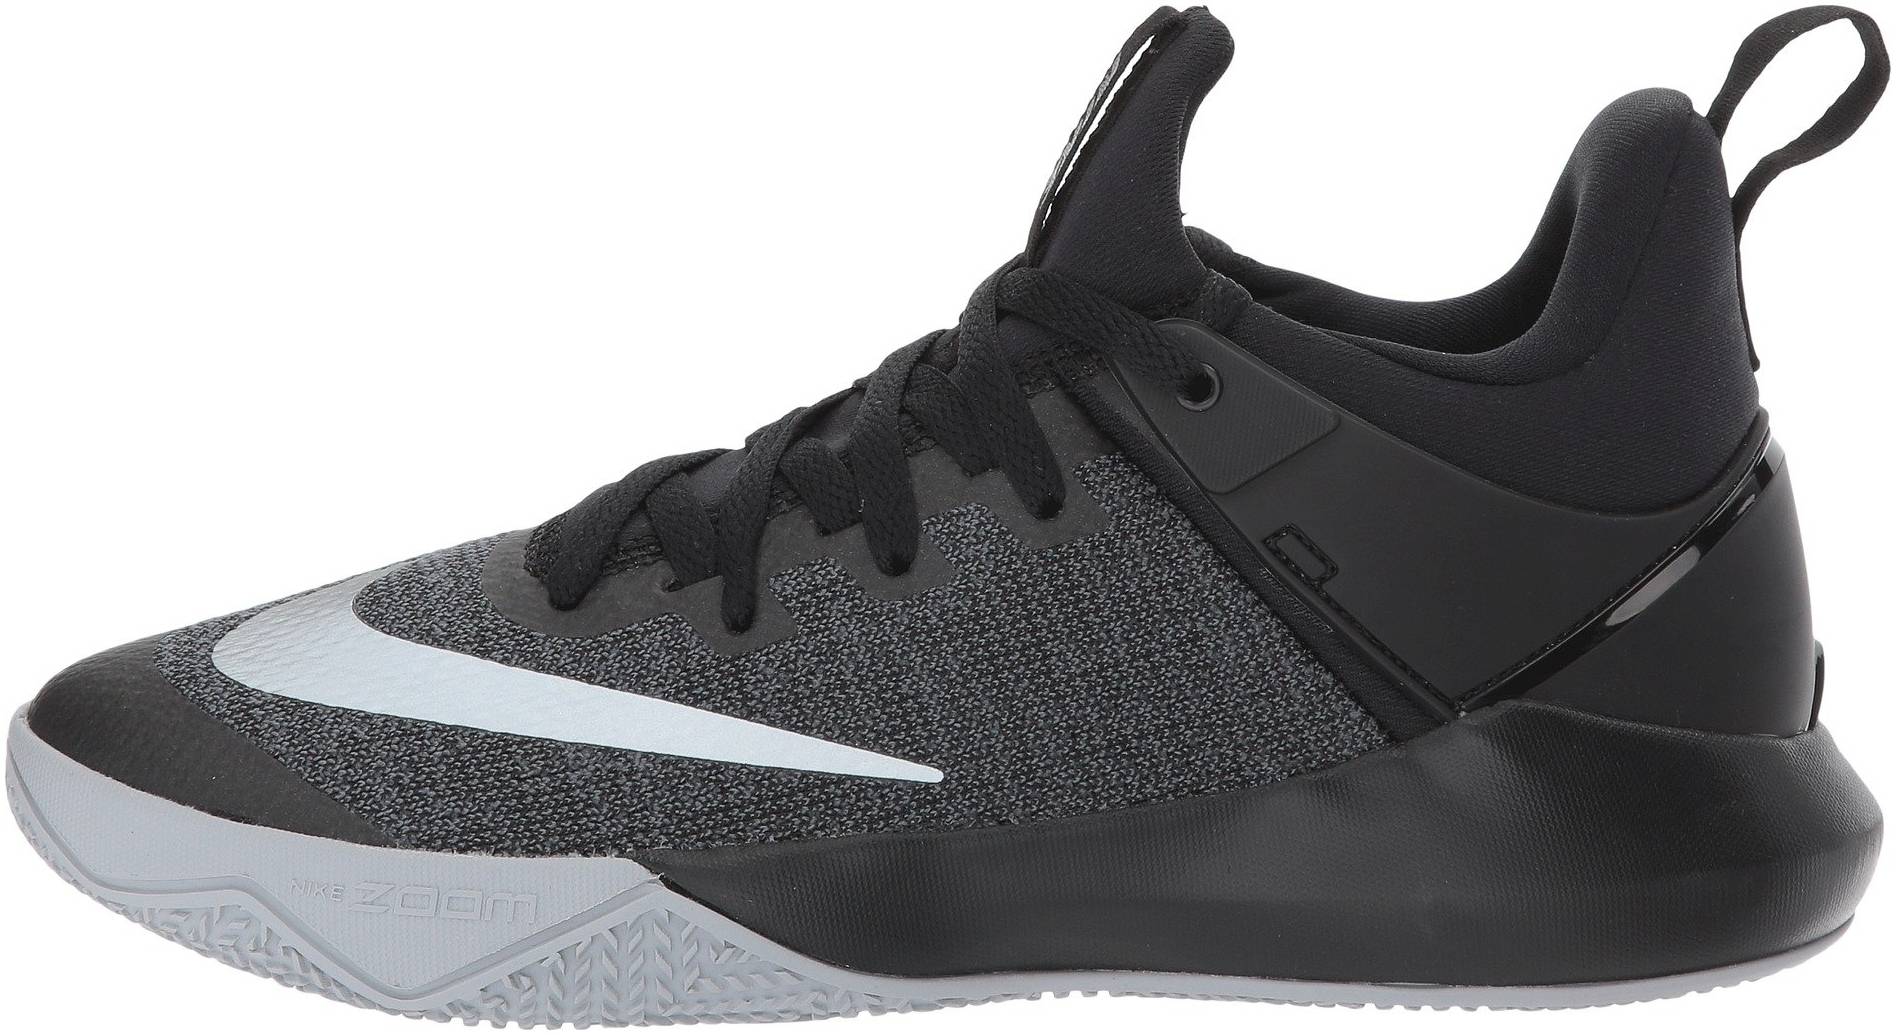 nike zoom shift basketball review